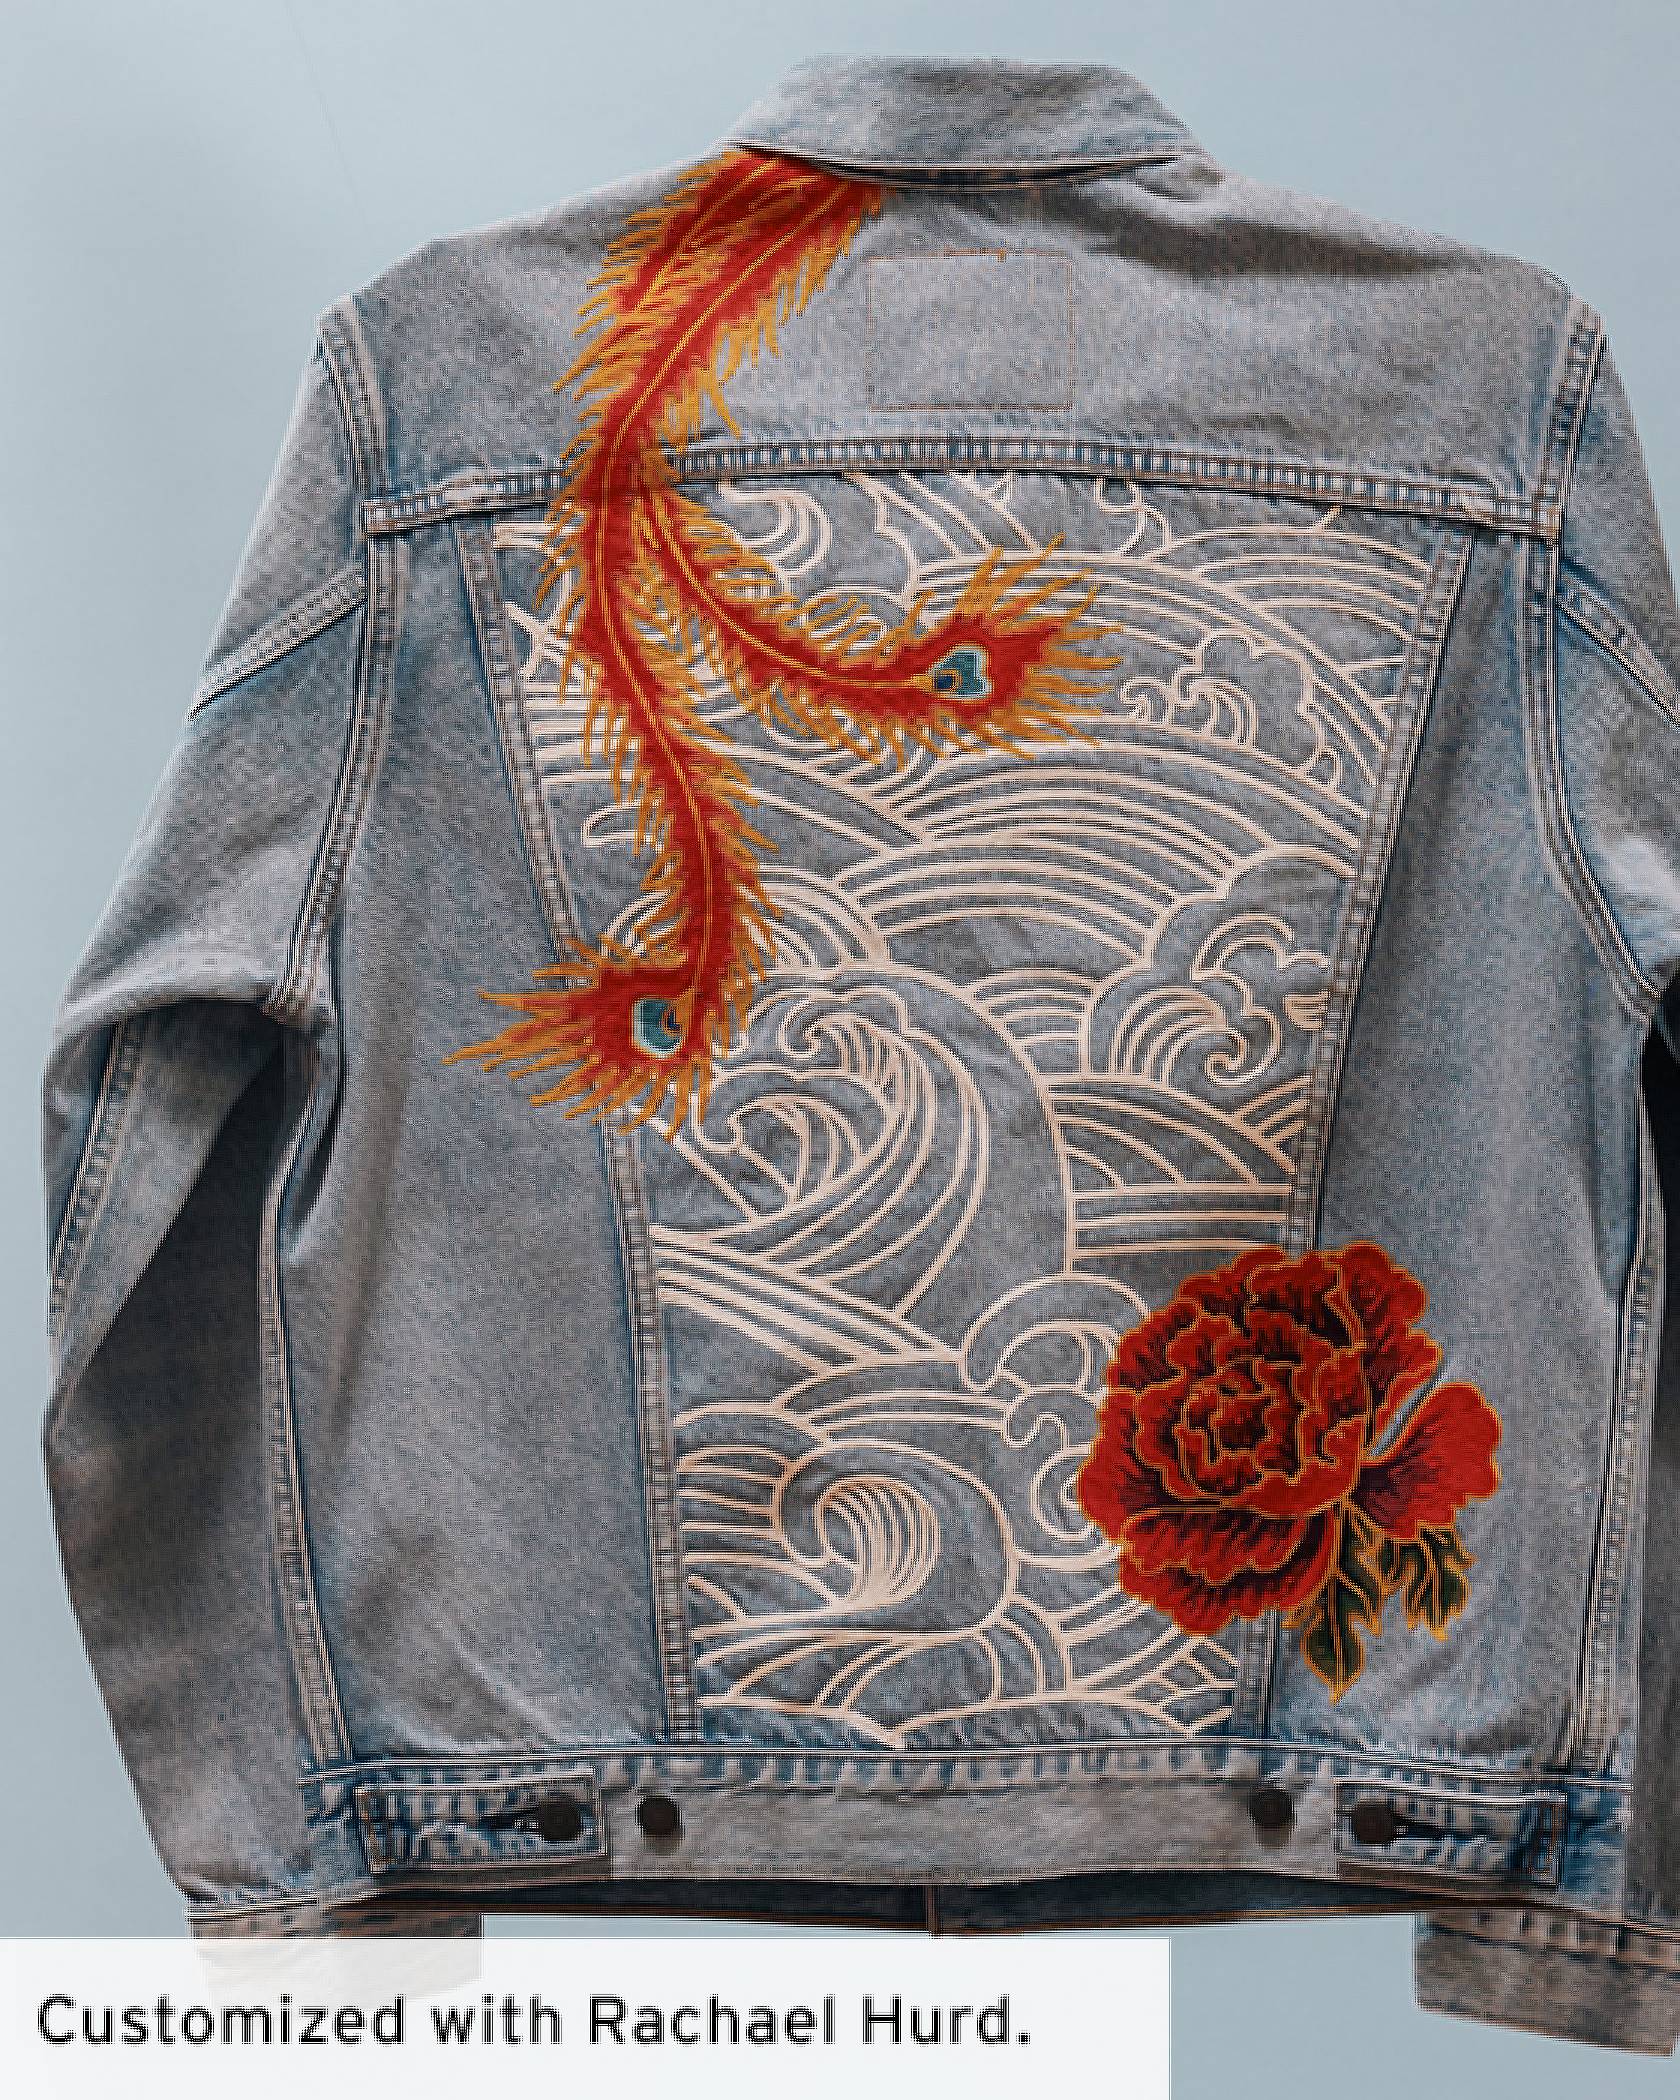 A customized trucker jacket with flowers and waves